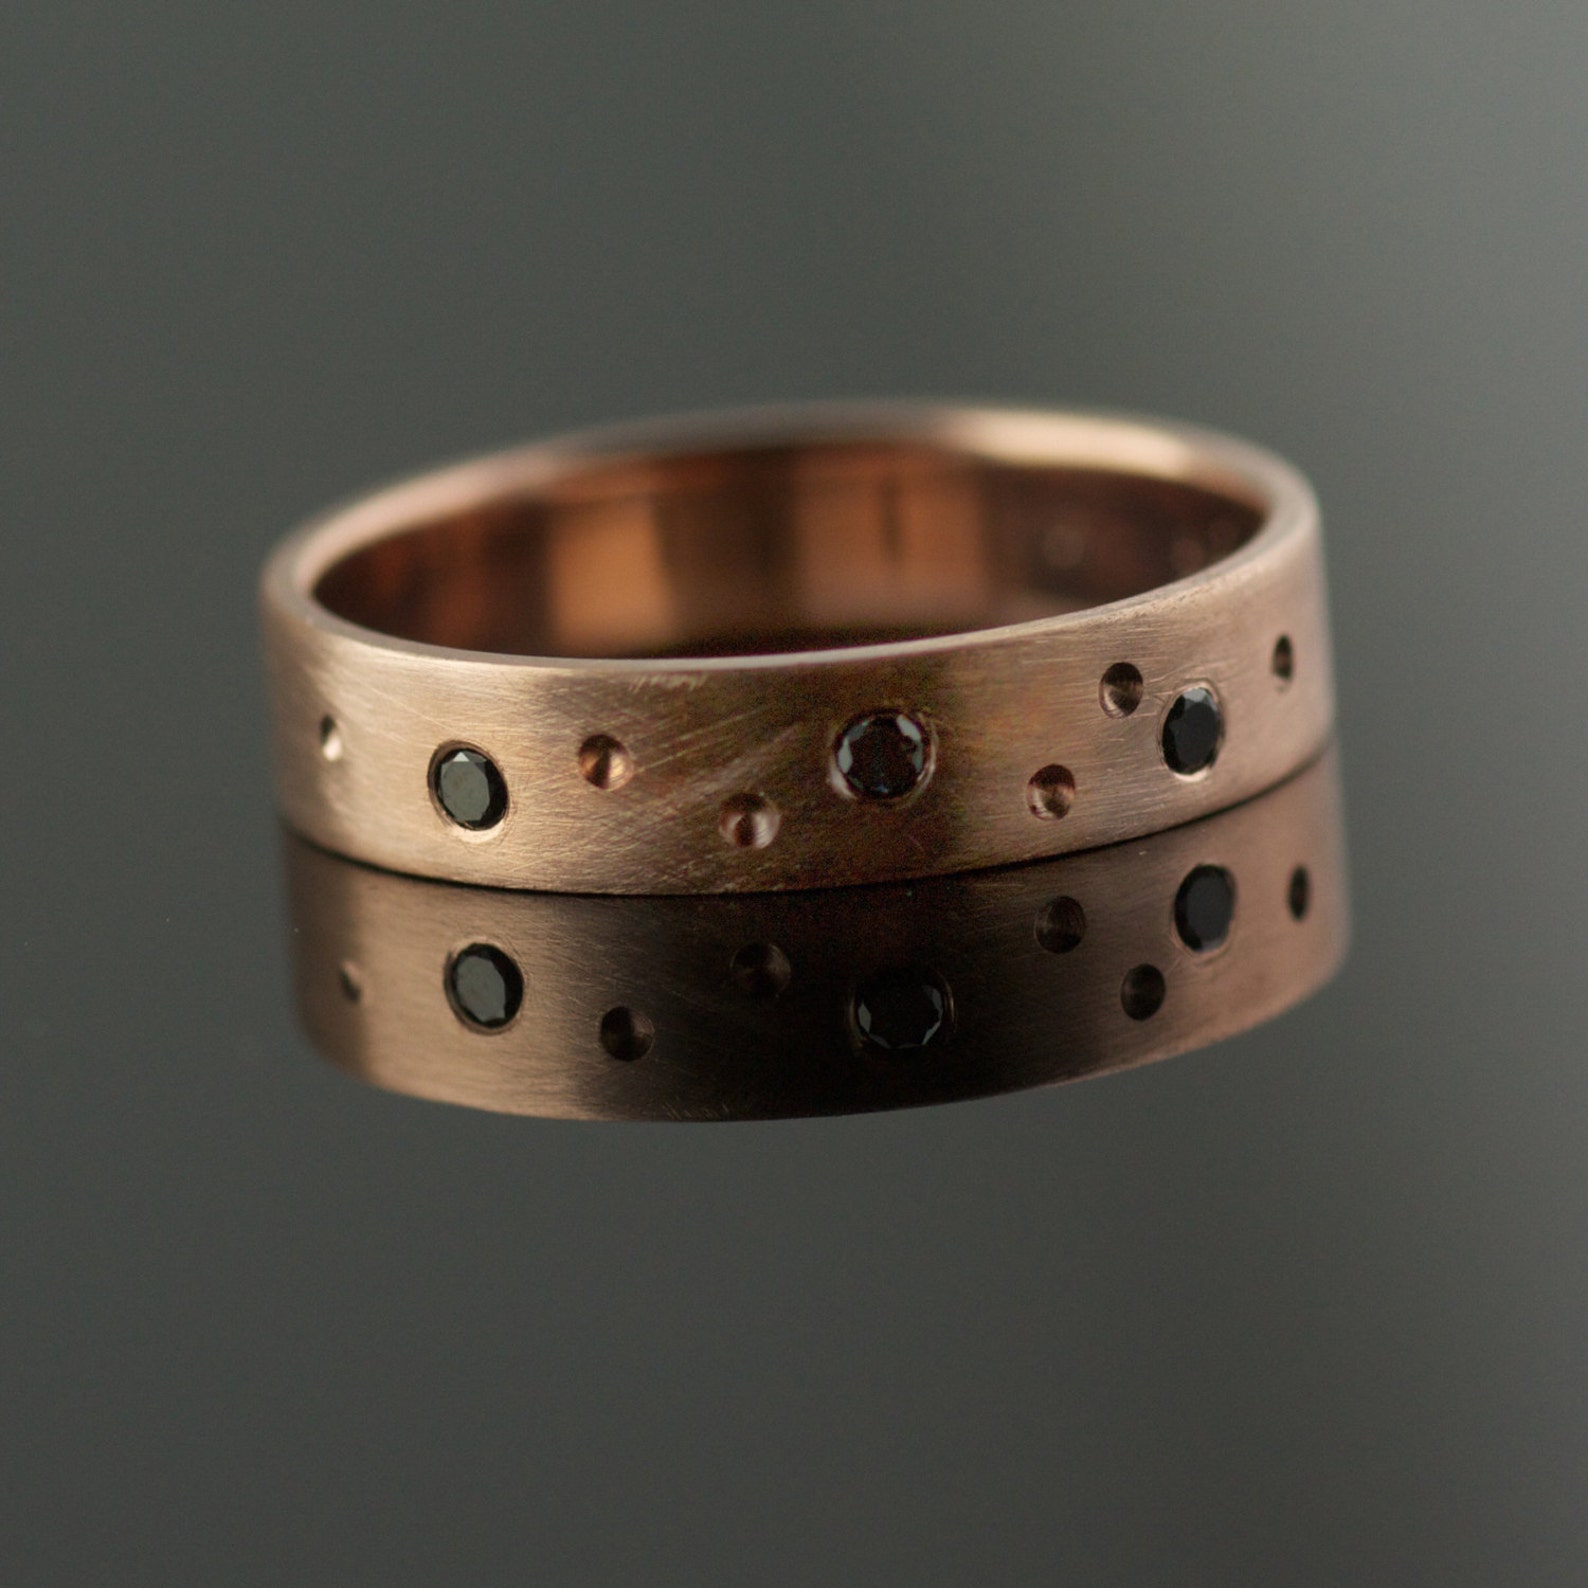 Roses & Rain // 14k Red Gold With Black Diamonds by VK Designs - Etsy